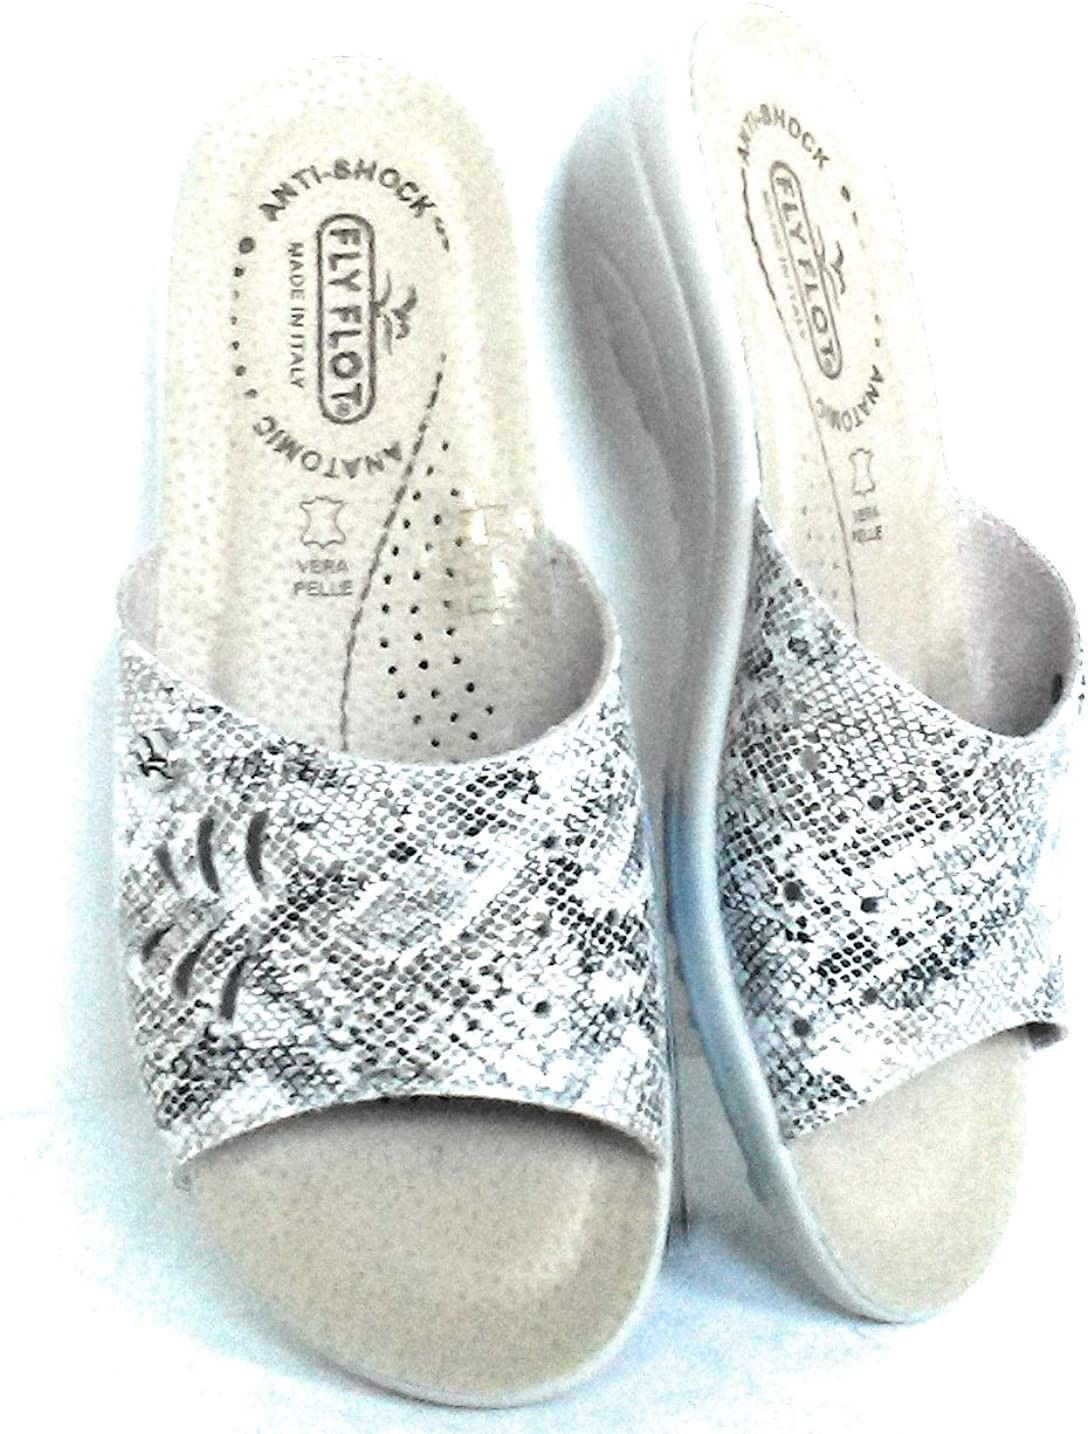 Fly Flot T4A54 R3 Bianco Ciabatte Donna Made in Italy Sottopiede Vera Pelle Zeppa 4 CM Antiscivolo ANTISHOCK Anatomica